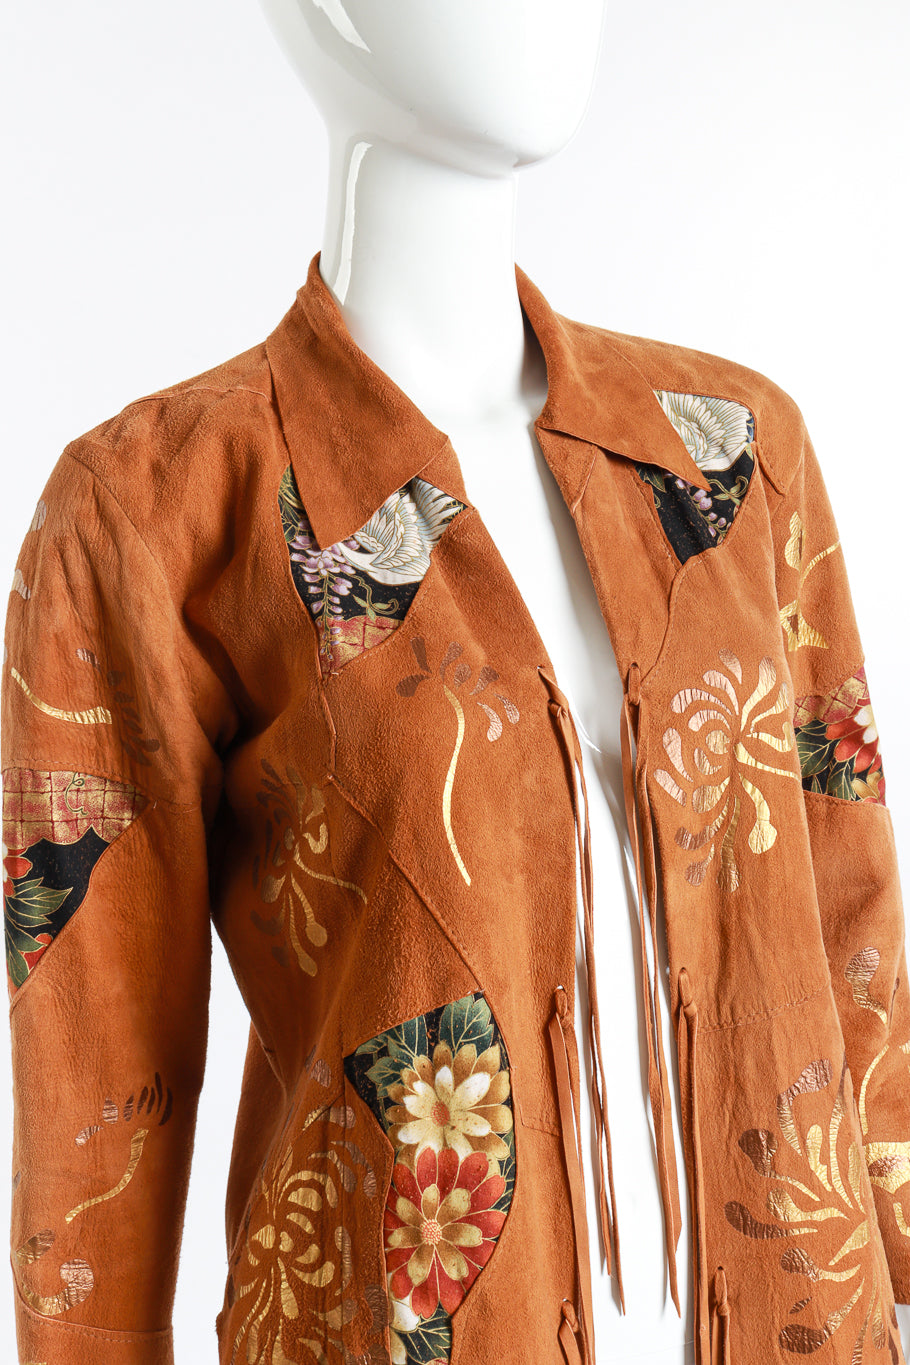 Chinoiserie Suede Jacket by Char front detail mannequin @RECESS LA